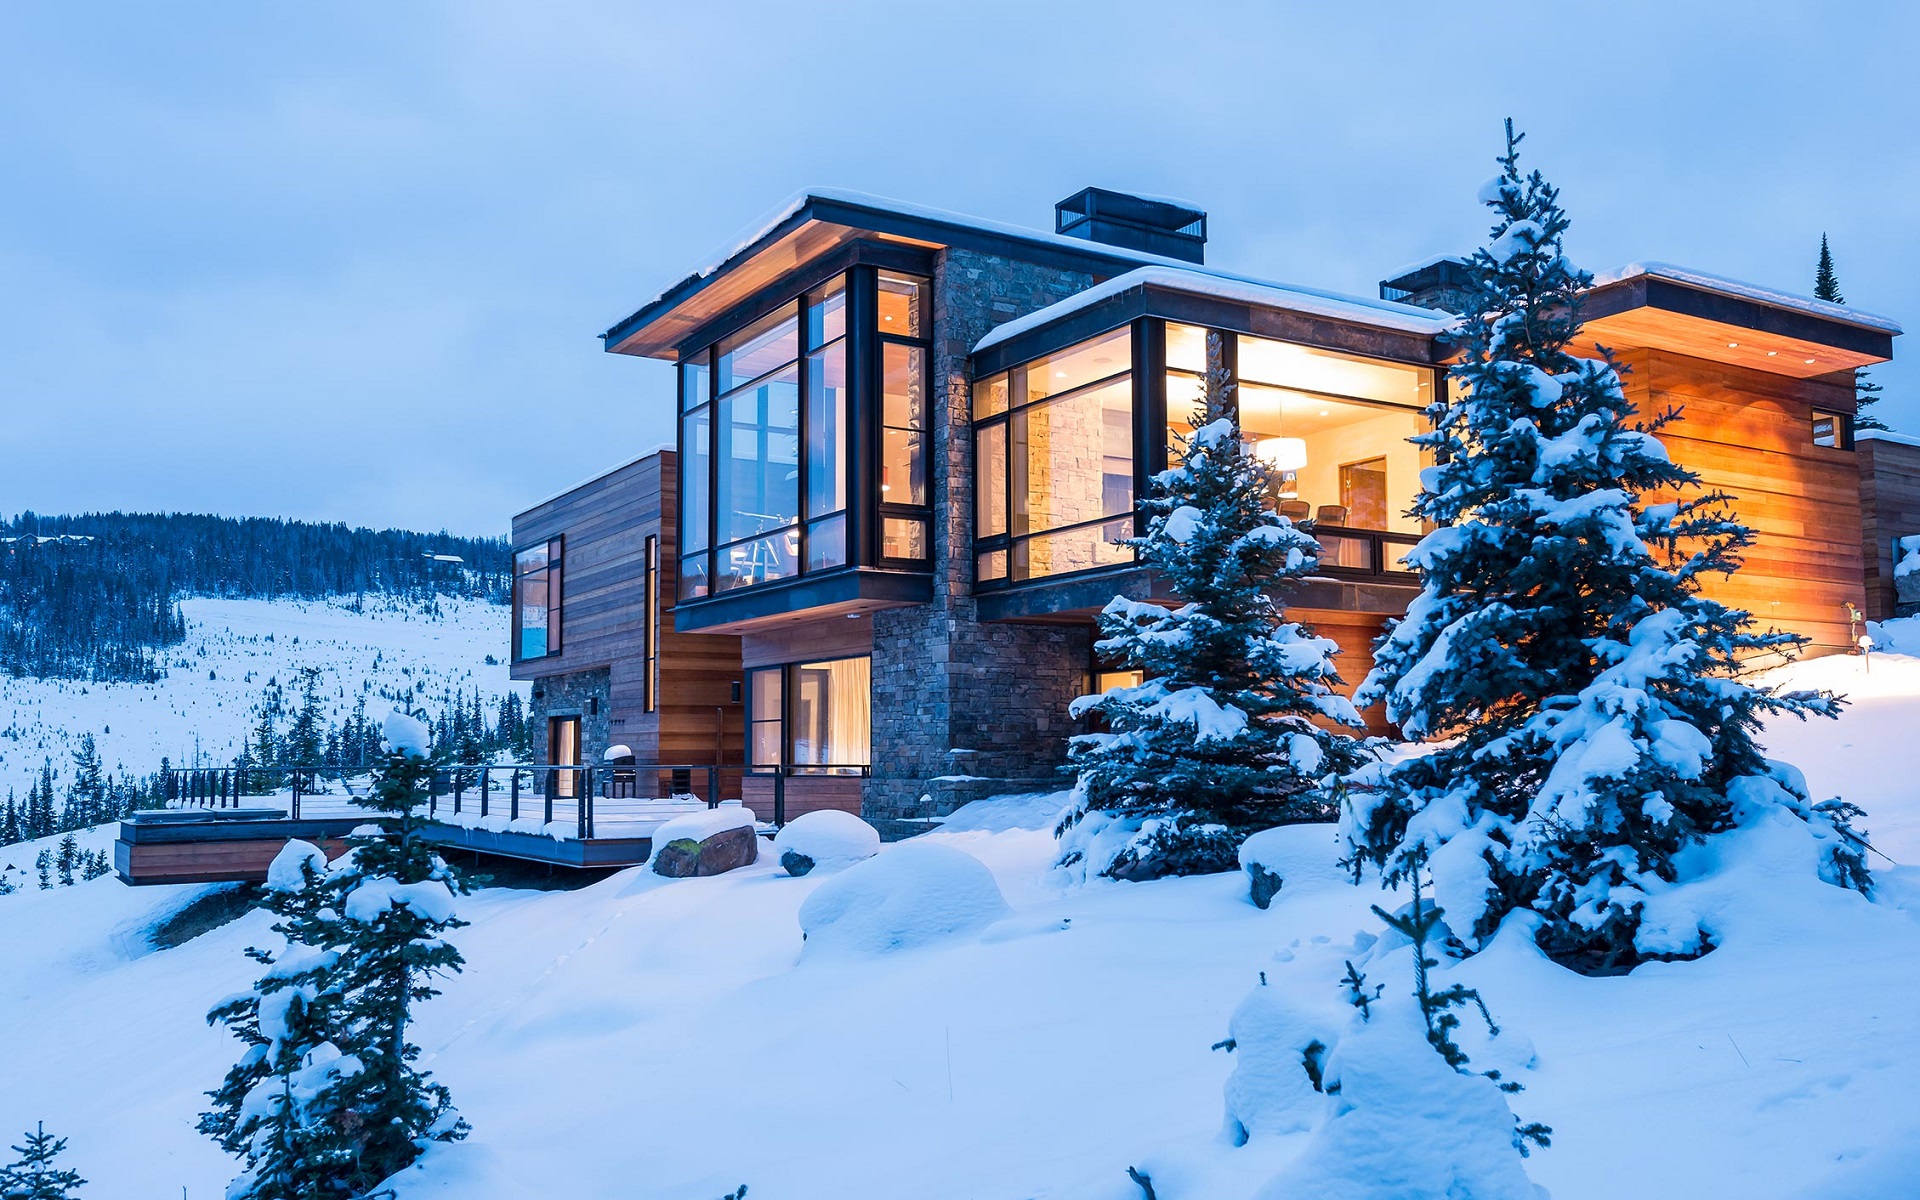 house, Modern, Winter, Snow, Trees, Building, Architecture Wallpapers HD / Desktop...